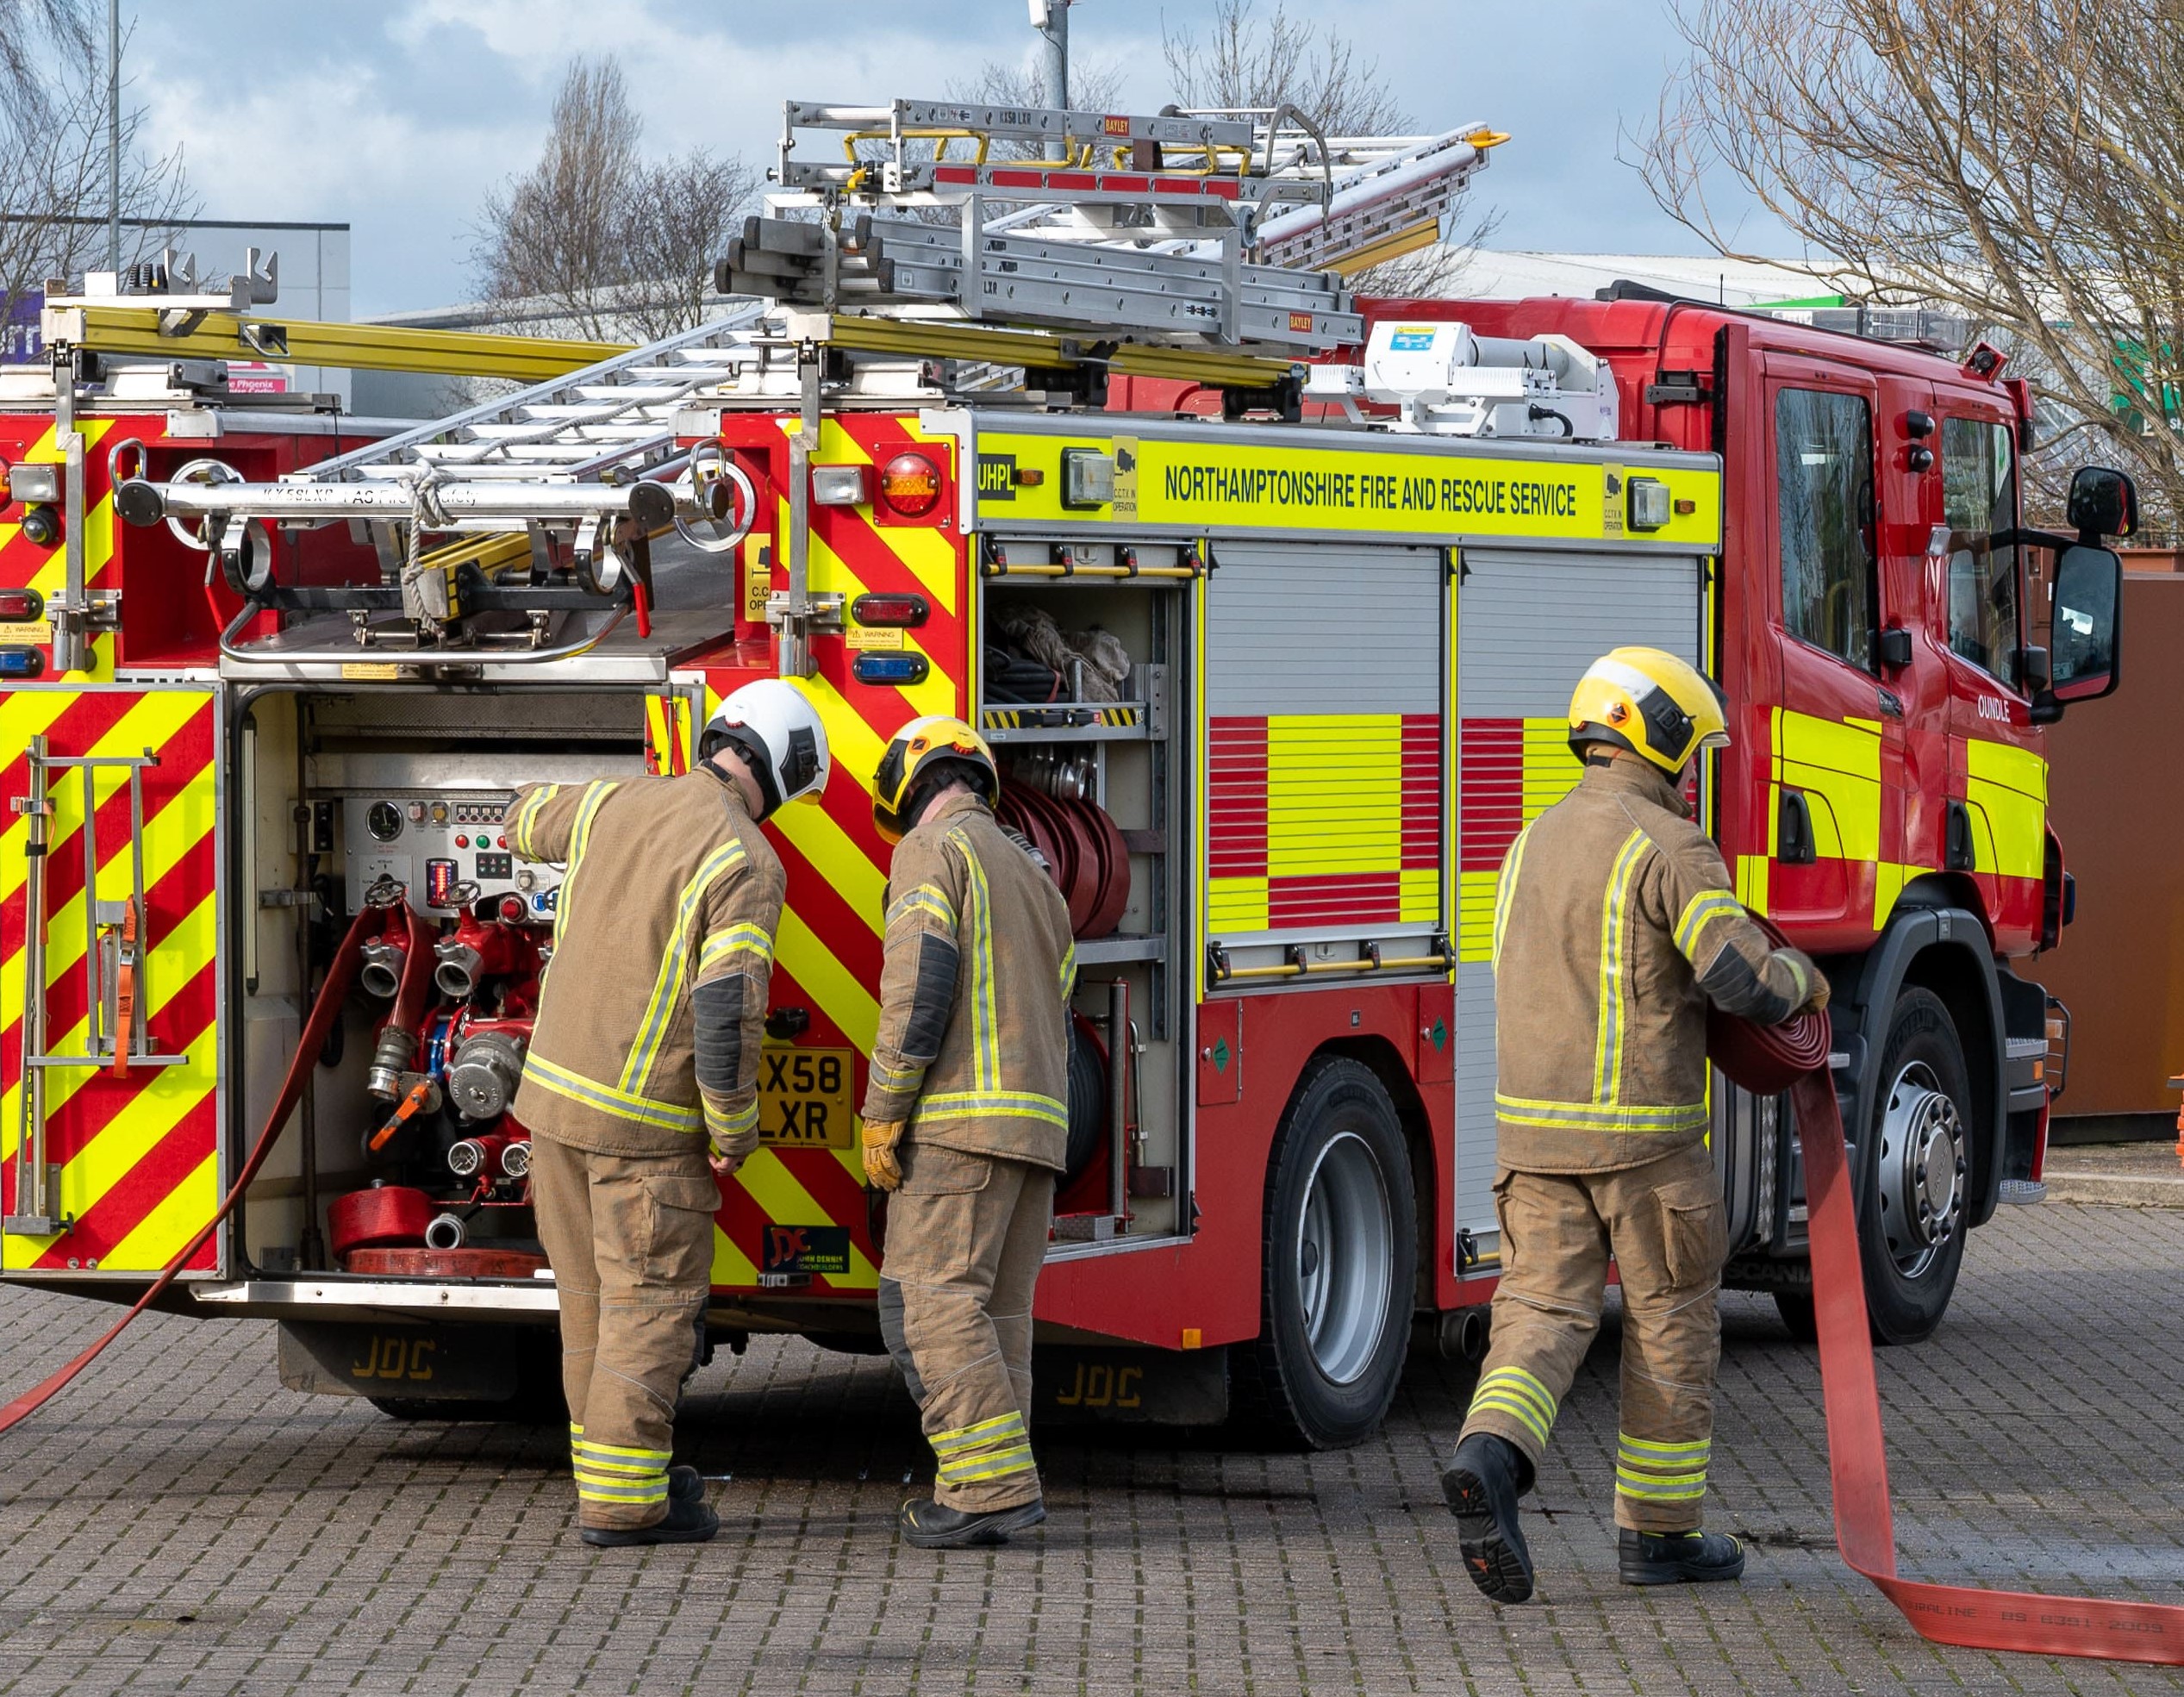 Firefighters with hose and equipment by fire appliance